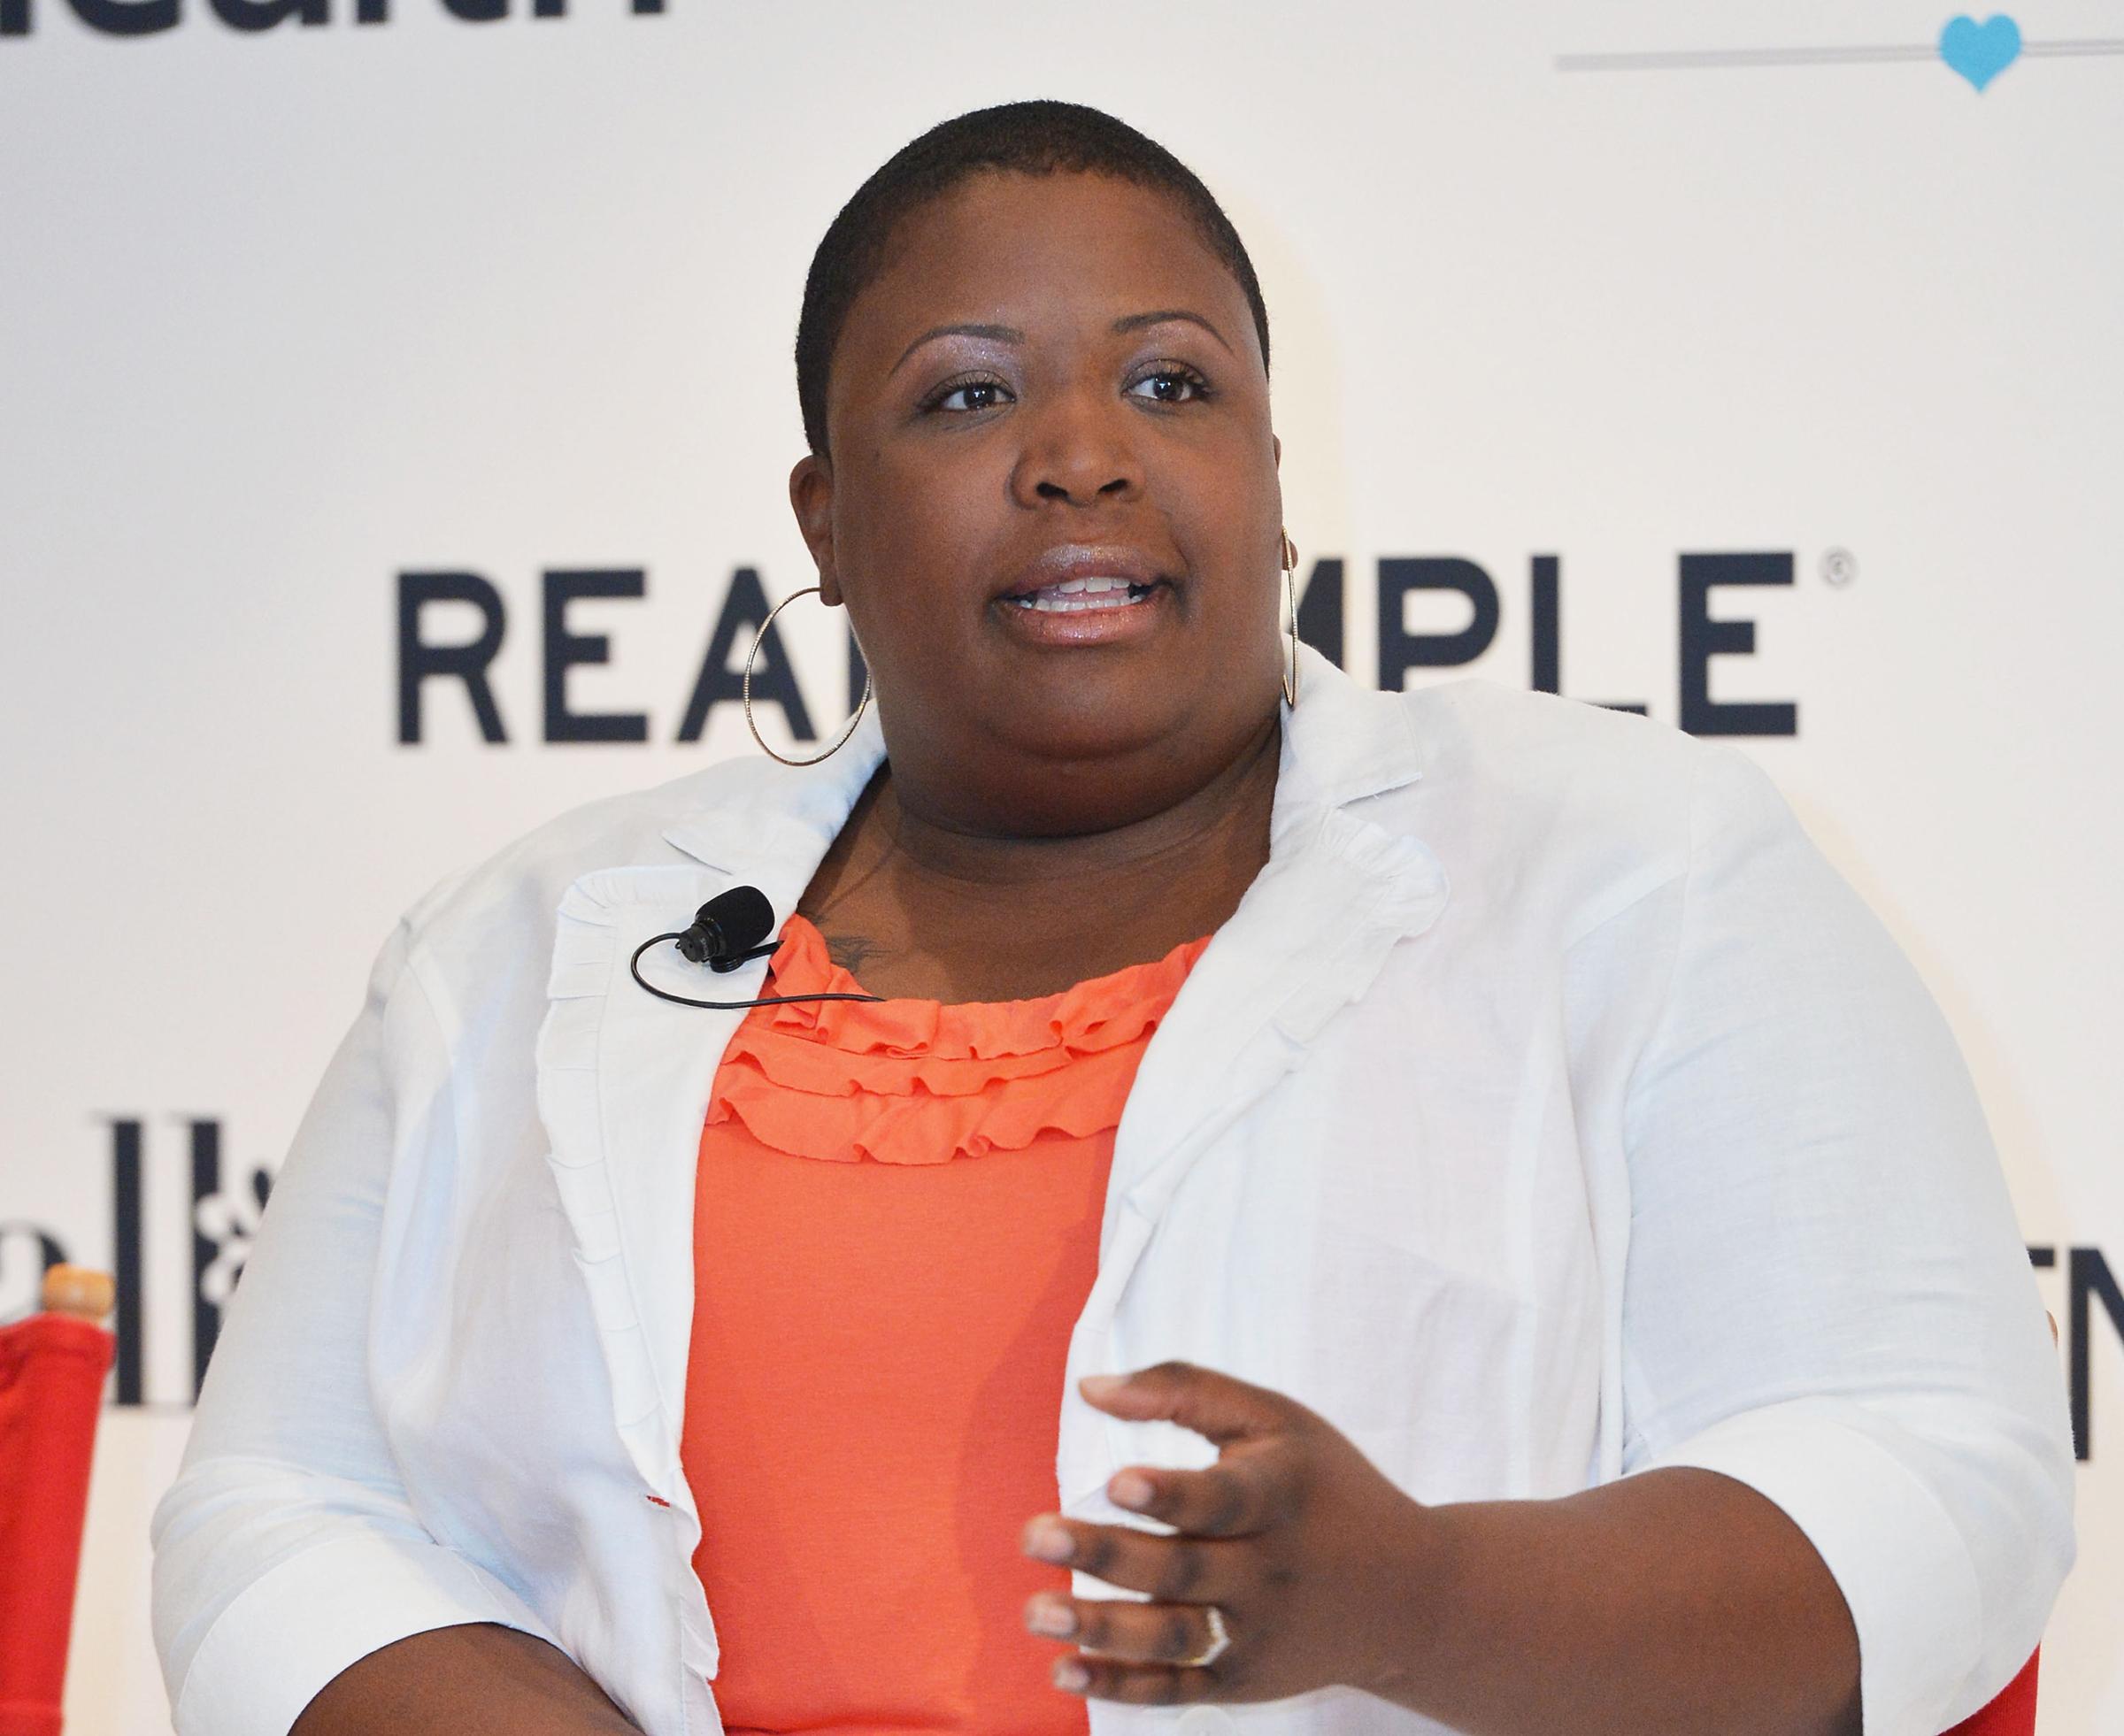 Cleopatra Cowley-Pendleton, mother of gun violence victim attends "Make One Simple Change" panel and breakfast at Time-Life Building in New York City on June 13, 2013.